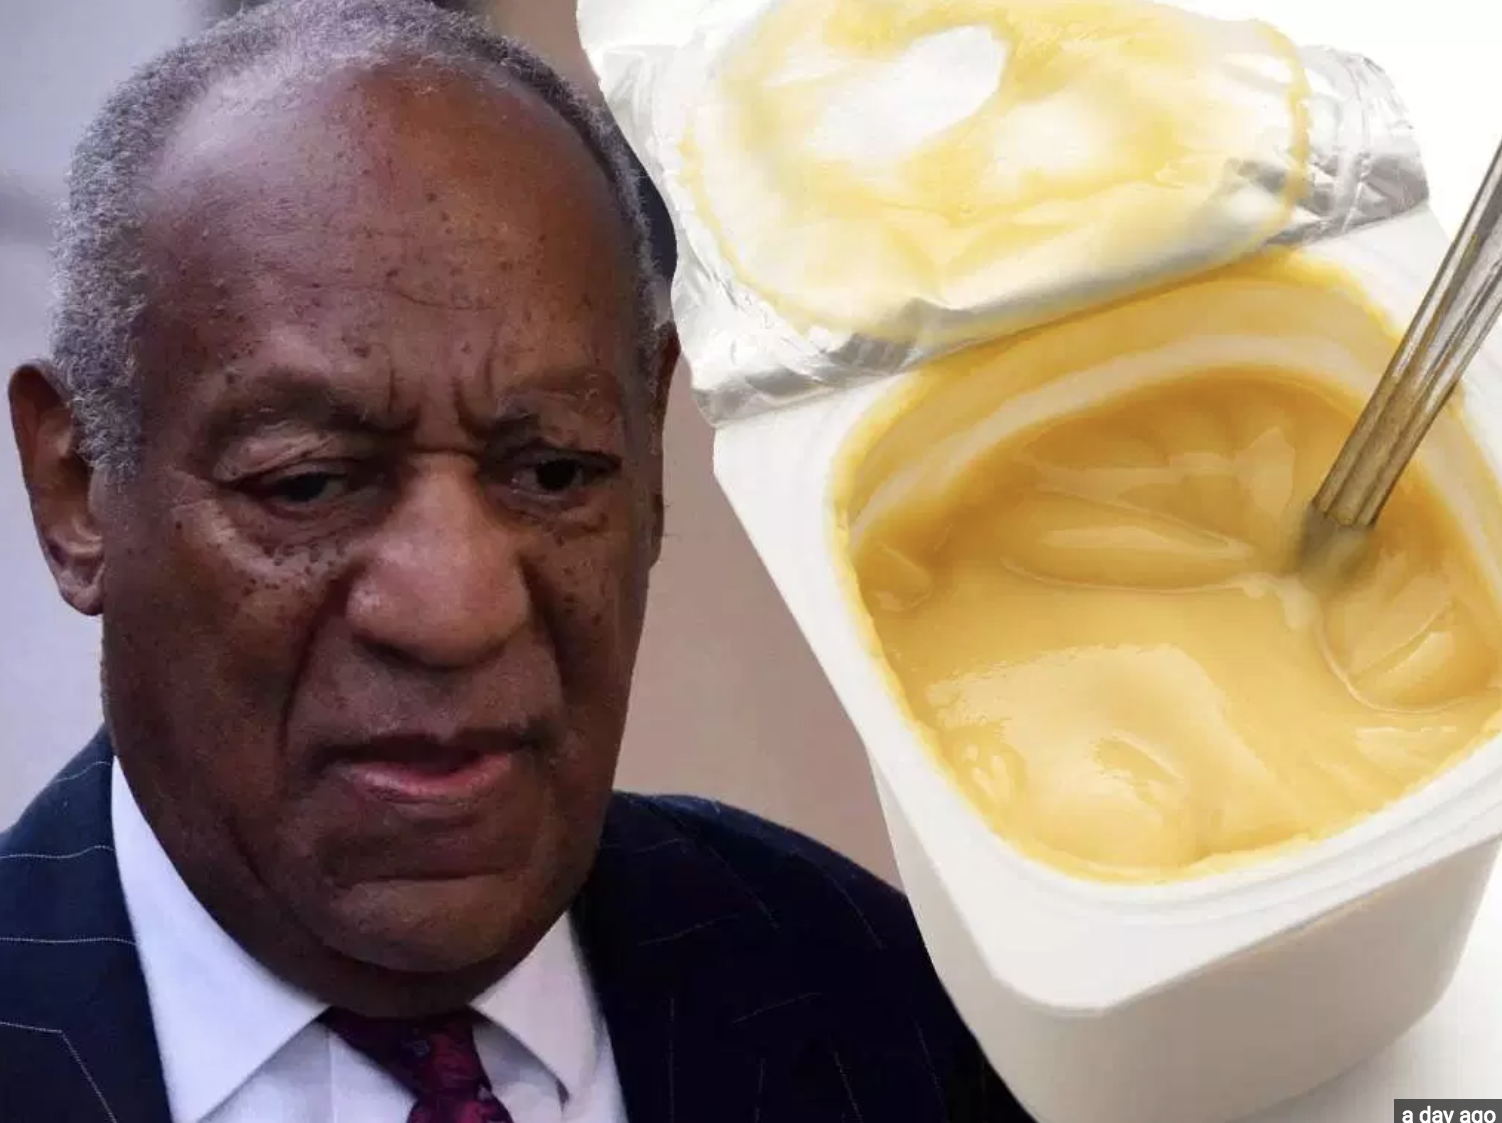 Bill Cosby Gets Vanilla Pudding in Jail for First Meal - Blurred Culture.